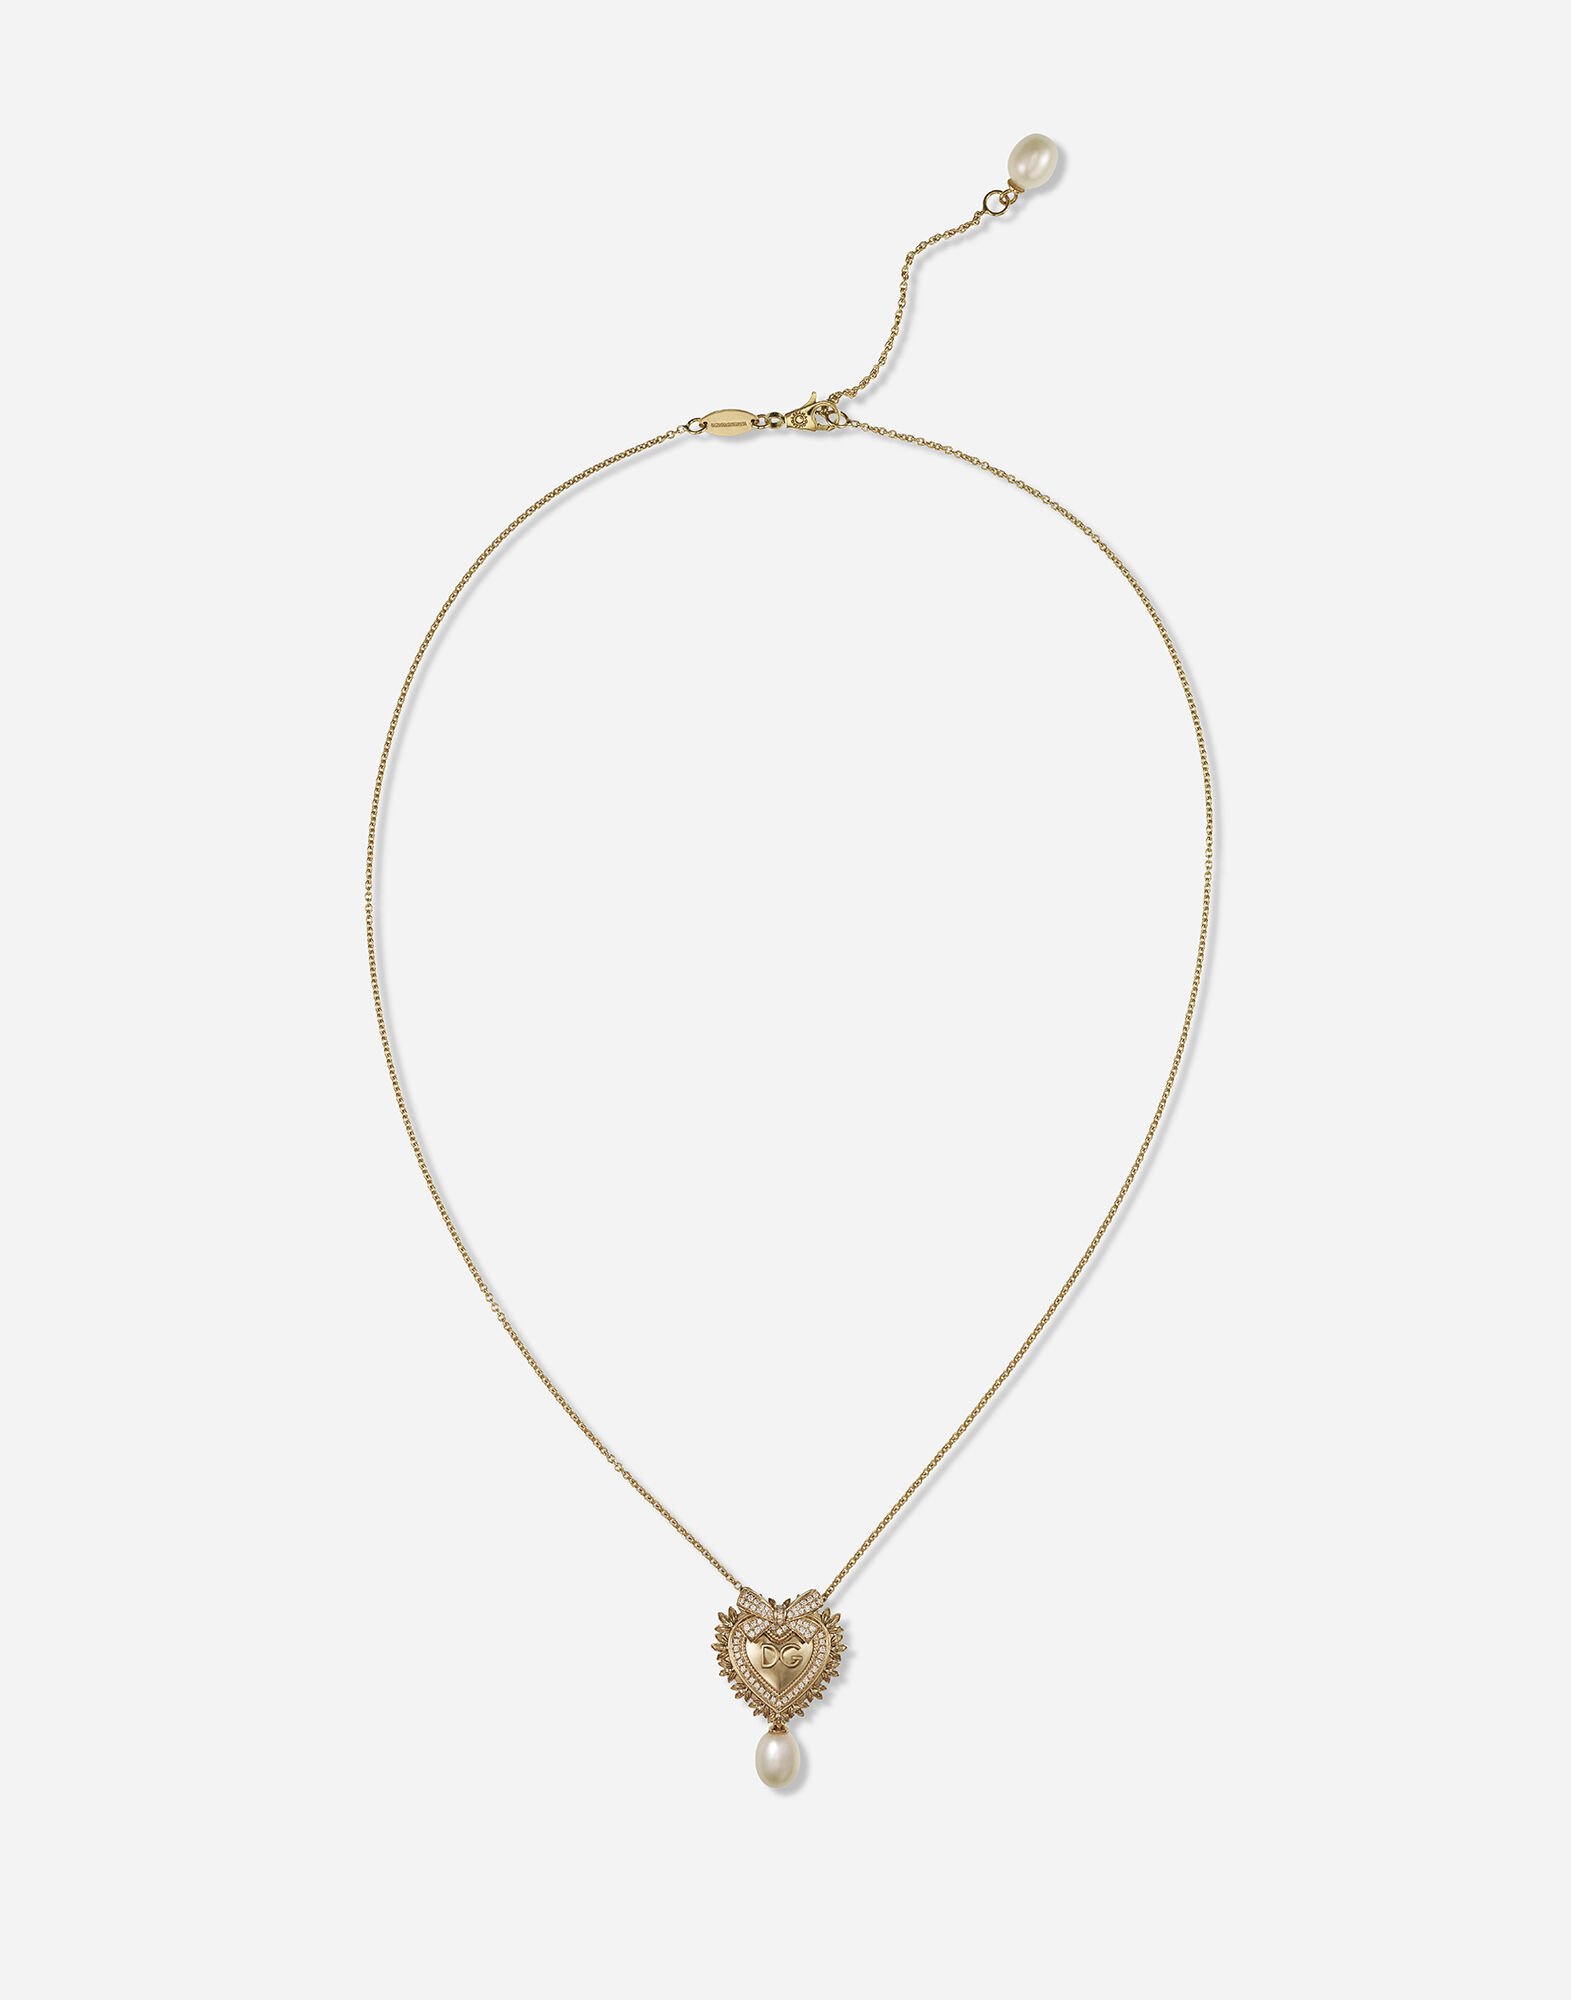 Dolce & Gabbana Devotion necklace in yellow gold with diamonds and pearls Gold/Black WEDC2GW0001